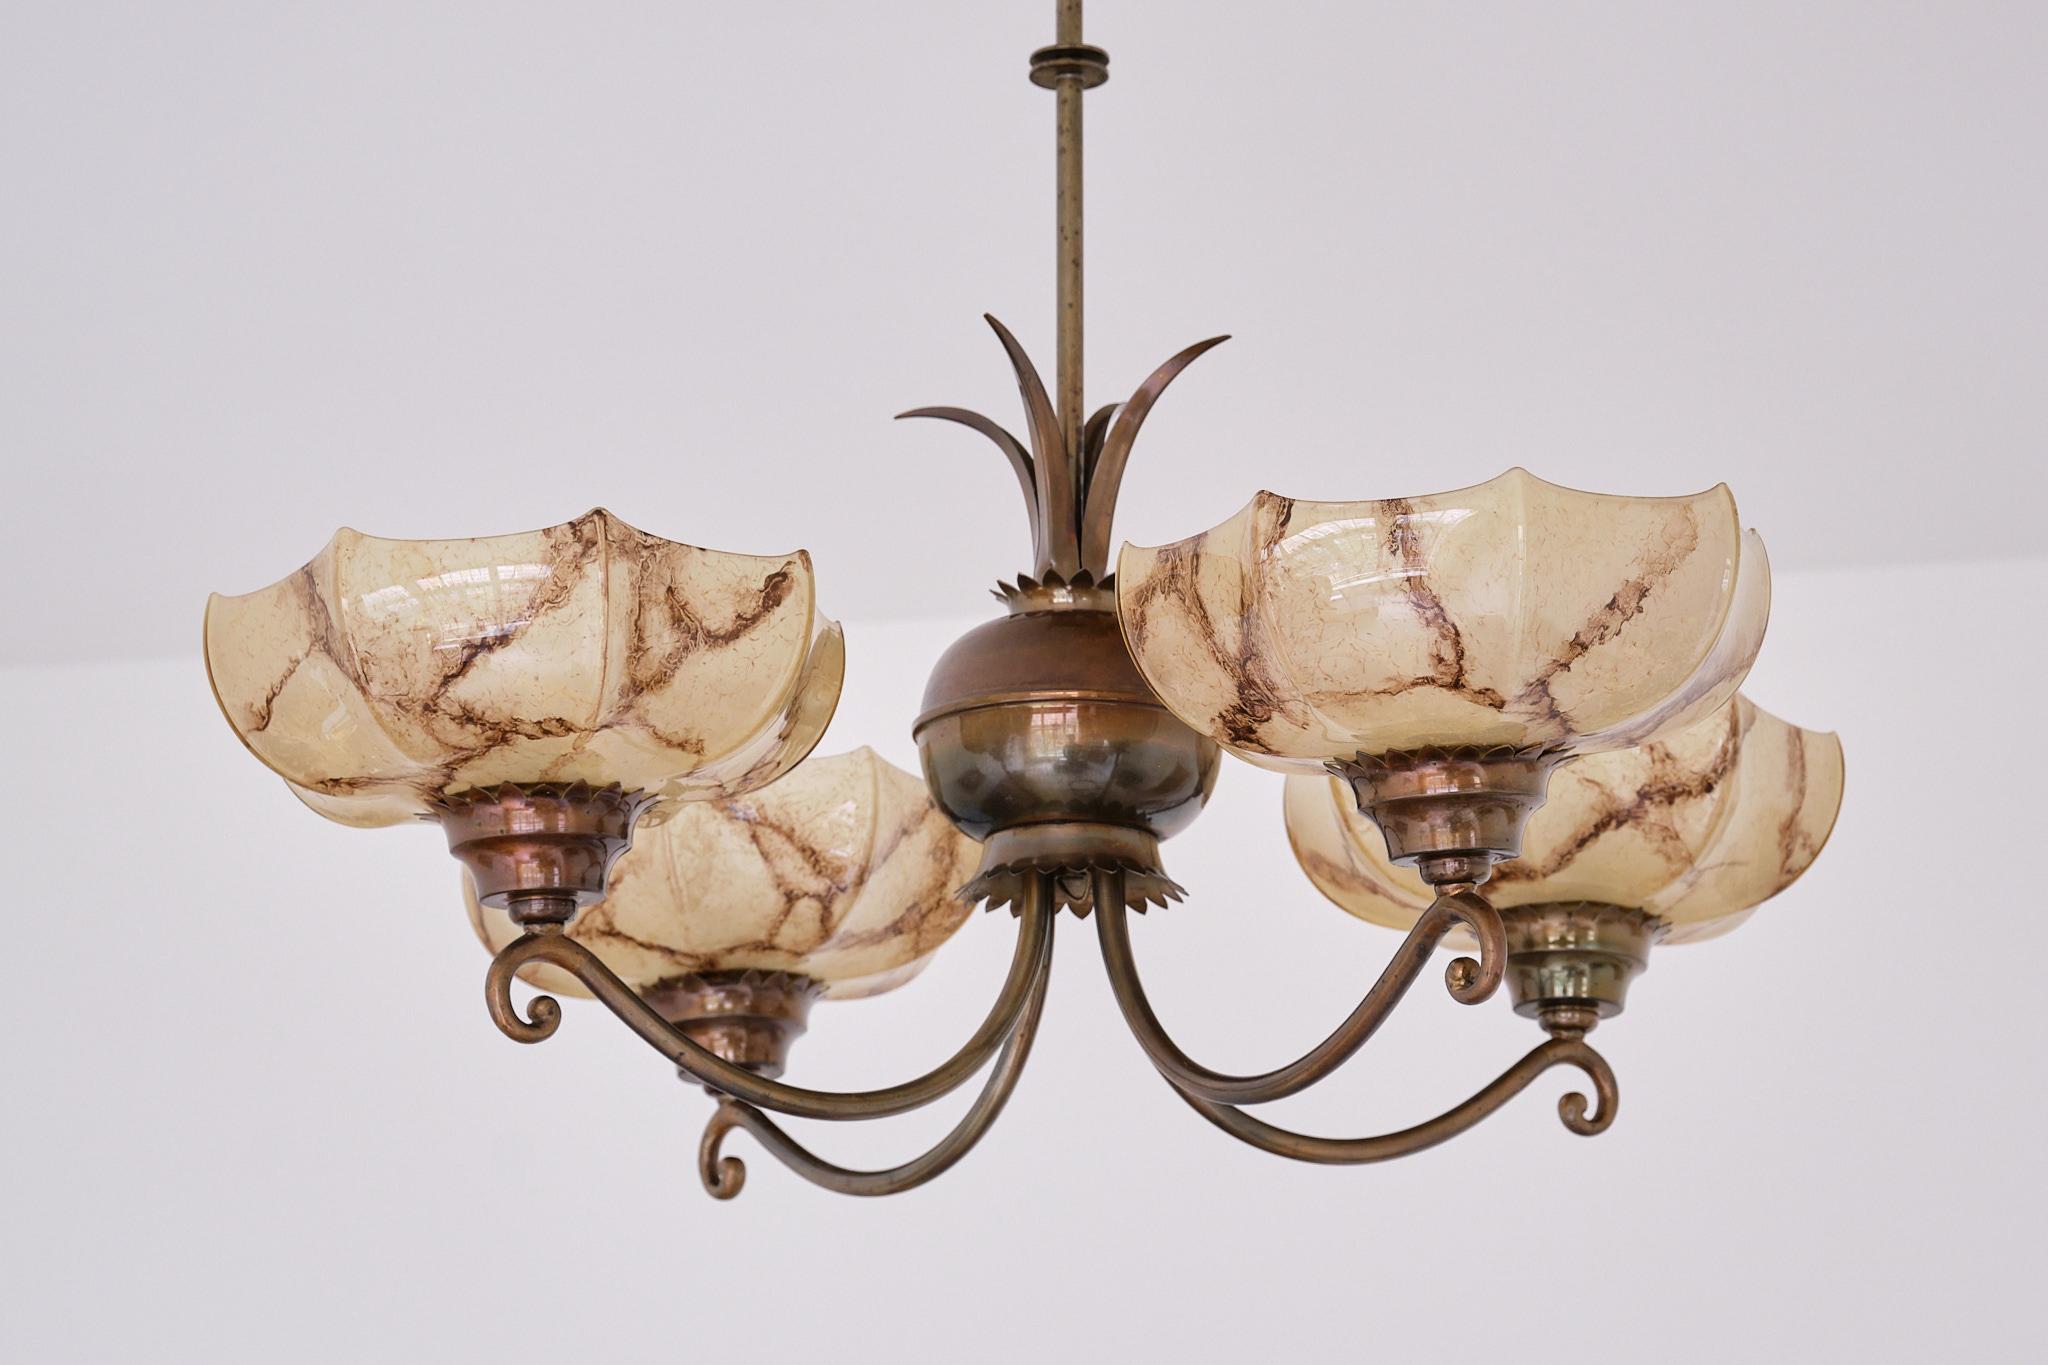 Harald Notini Chandelier in Brass and Marbled Glass, Böhlmarks, Sweden, 1927 For Sale 10